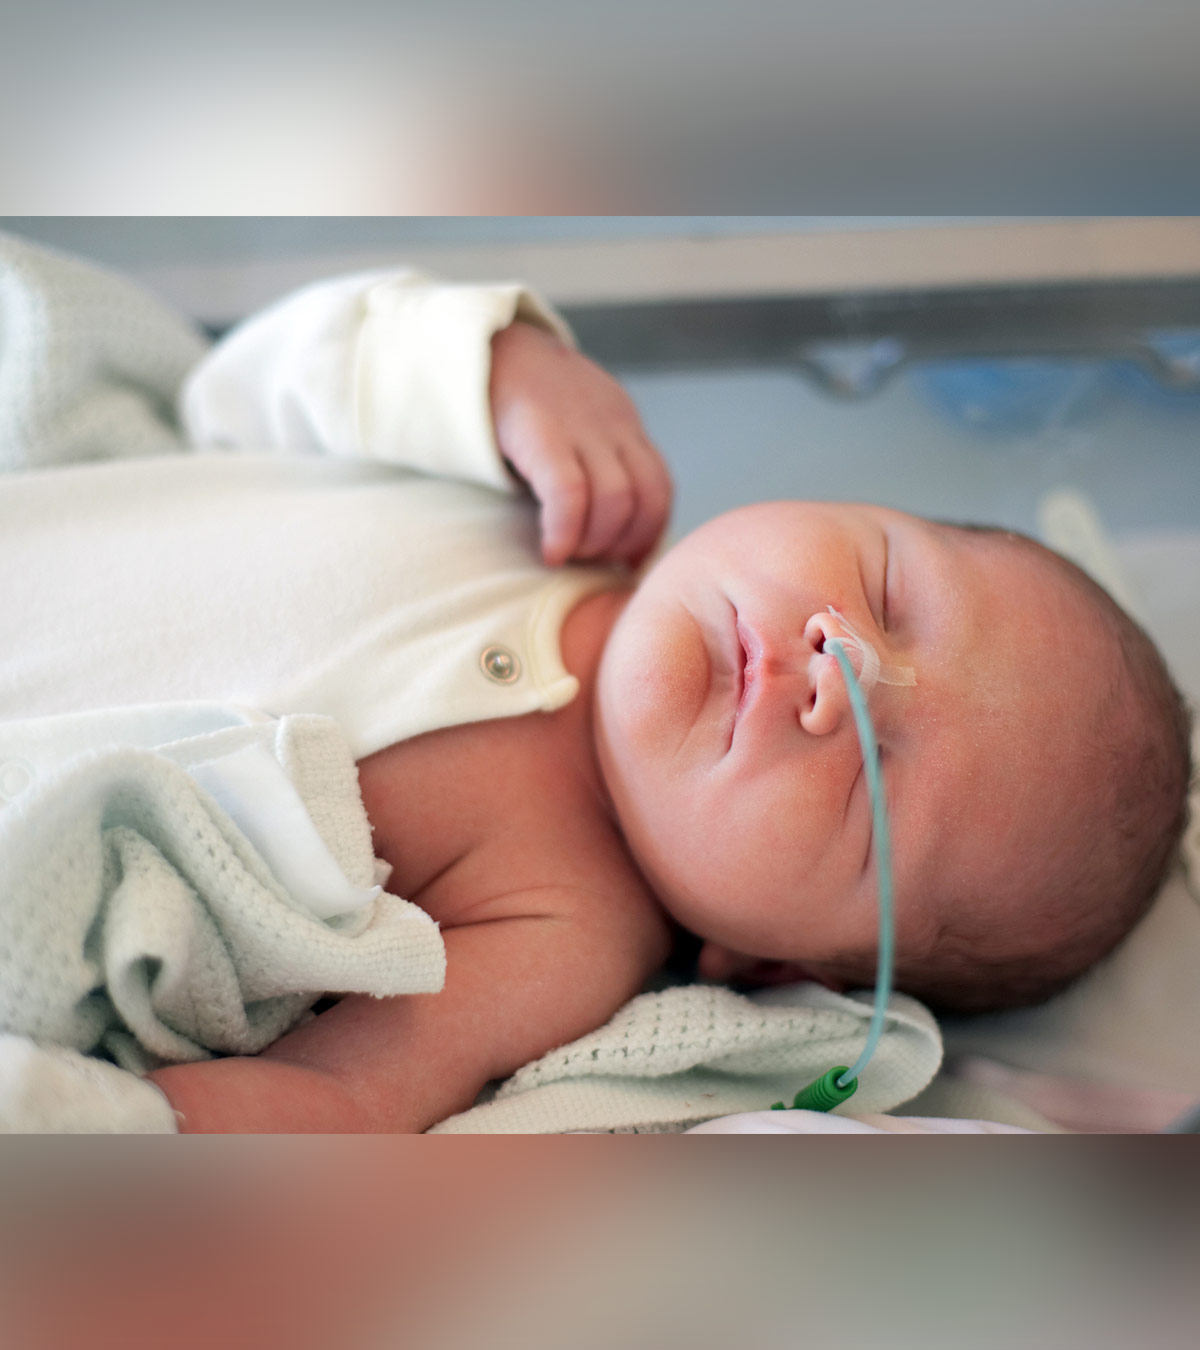 Infant Feeding Tube: Uses, Types, Procedure And Risks